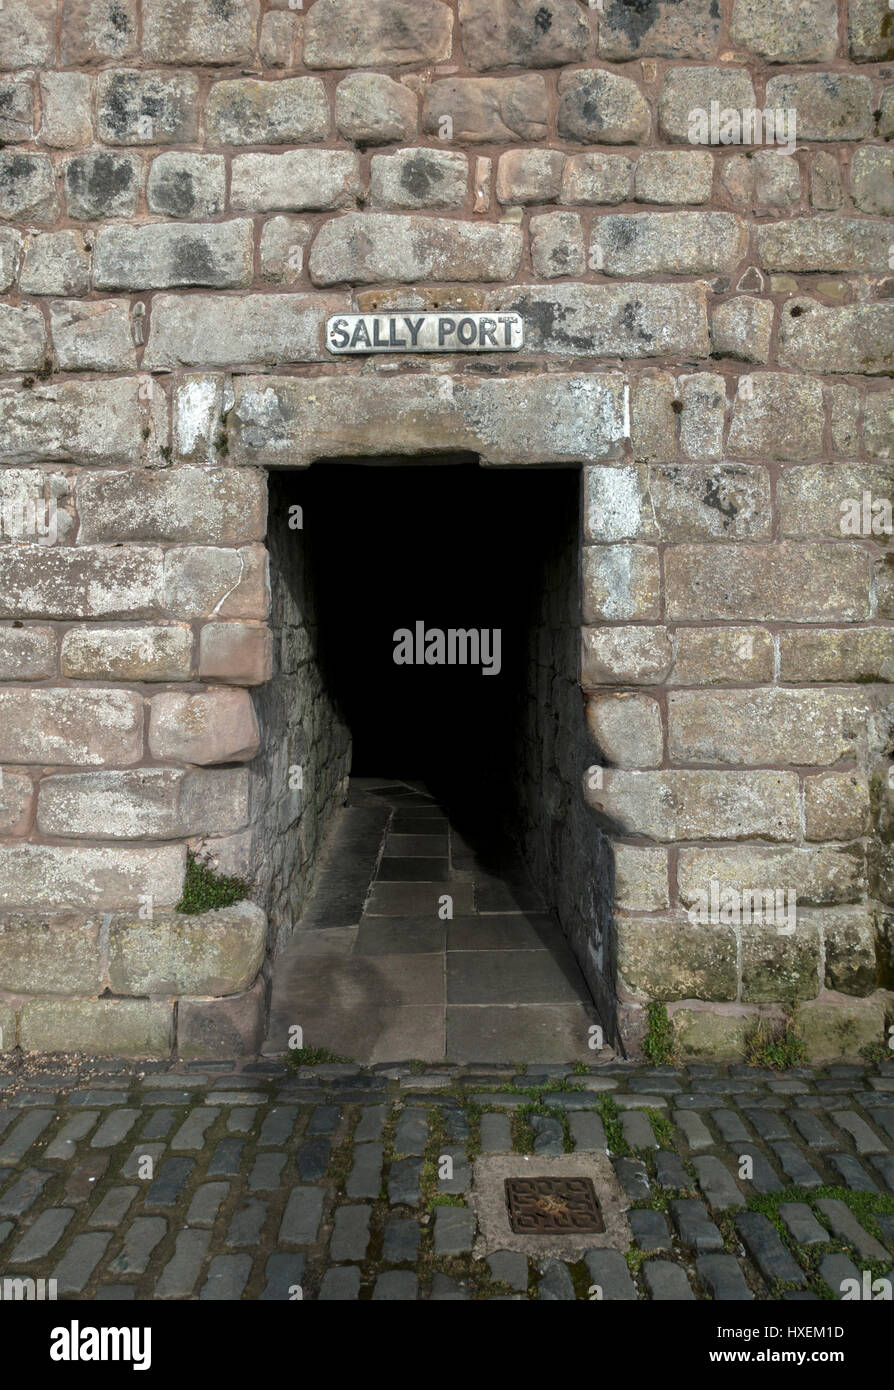 Sally Port in the walls of Berwick-upon-Tweed, Northumberland, the northernmost town in England Stock Photo